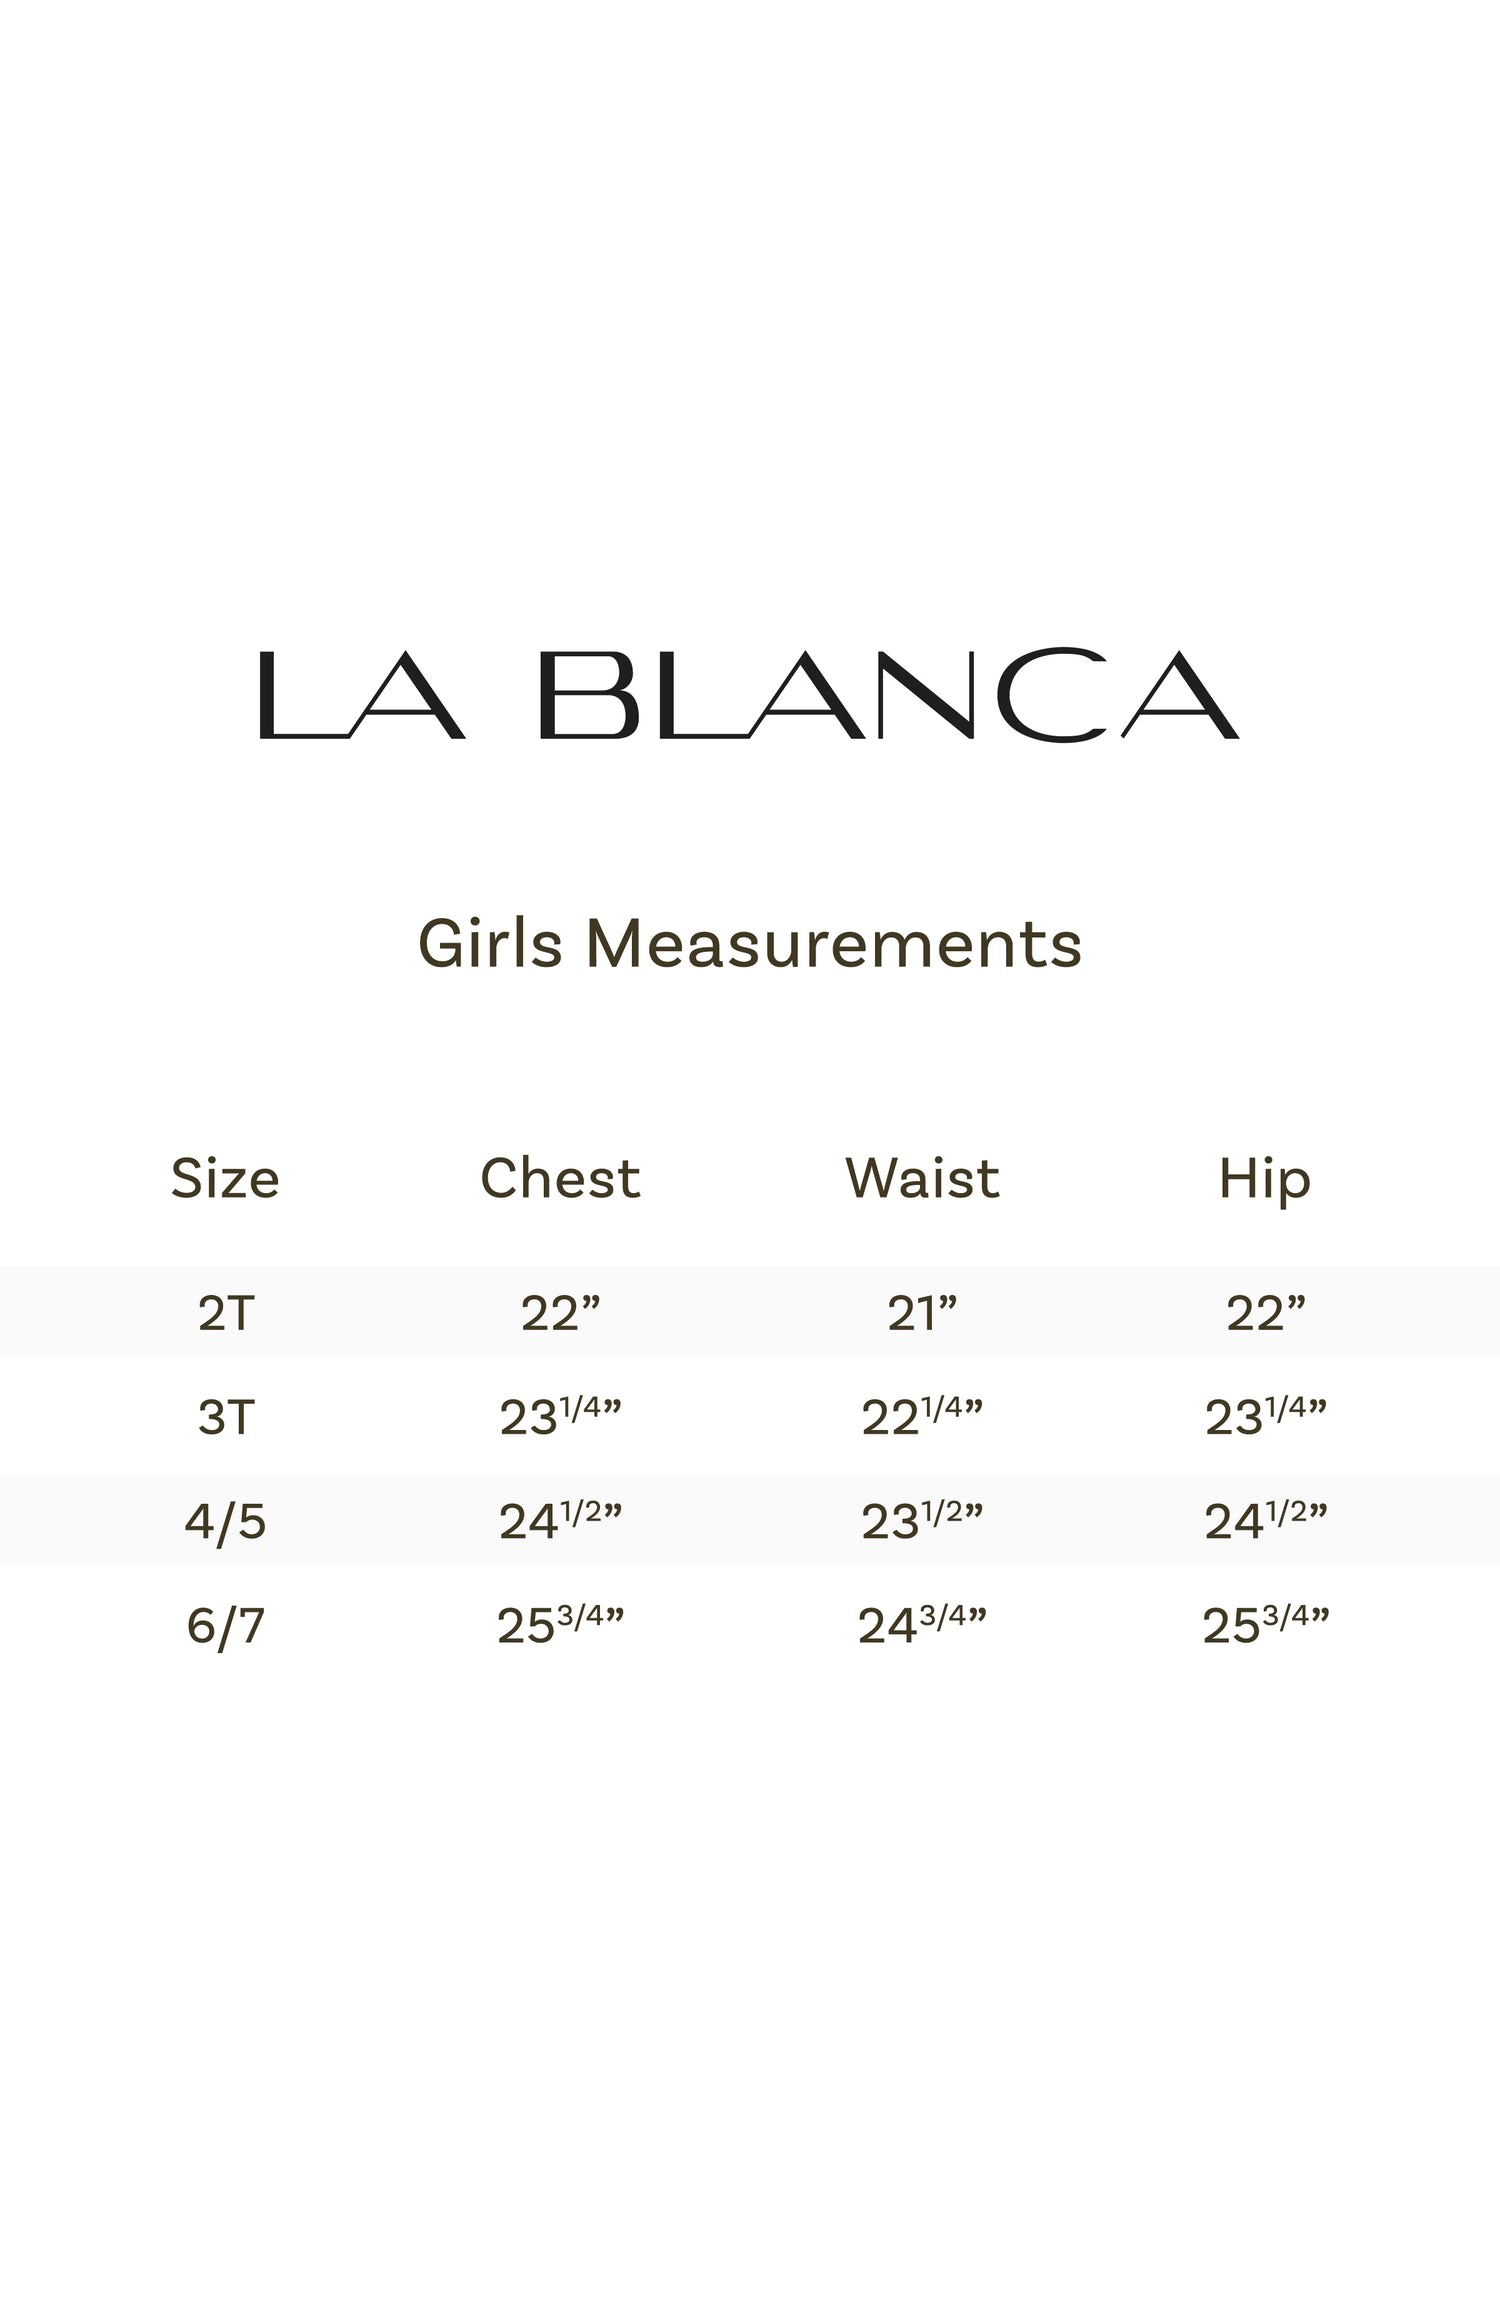 Size Guide Measurements Bunne Mamalade, 51% OFF